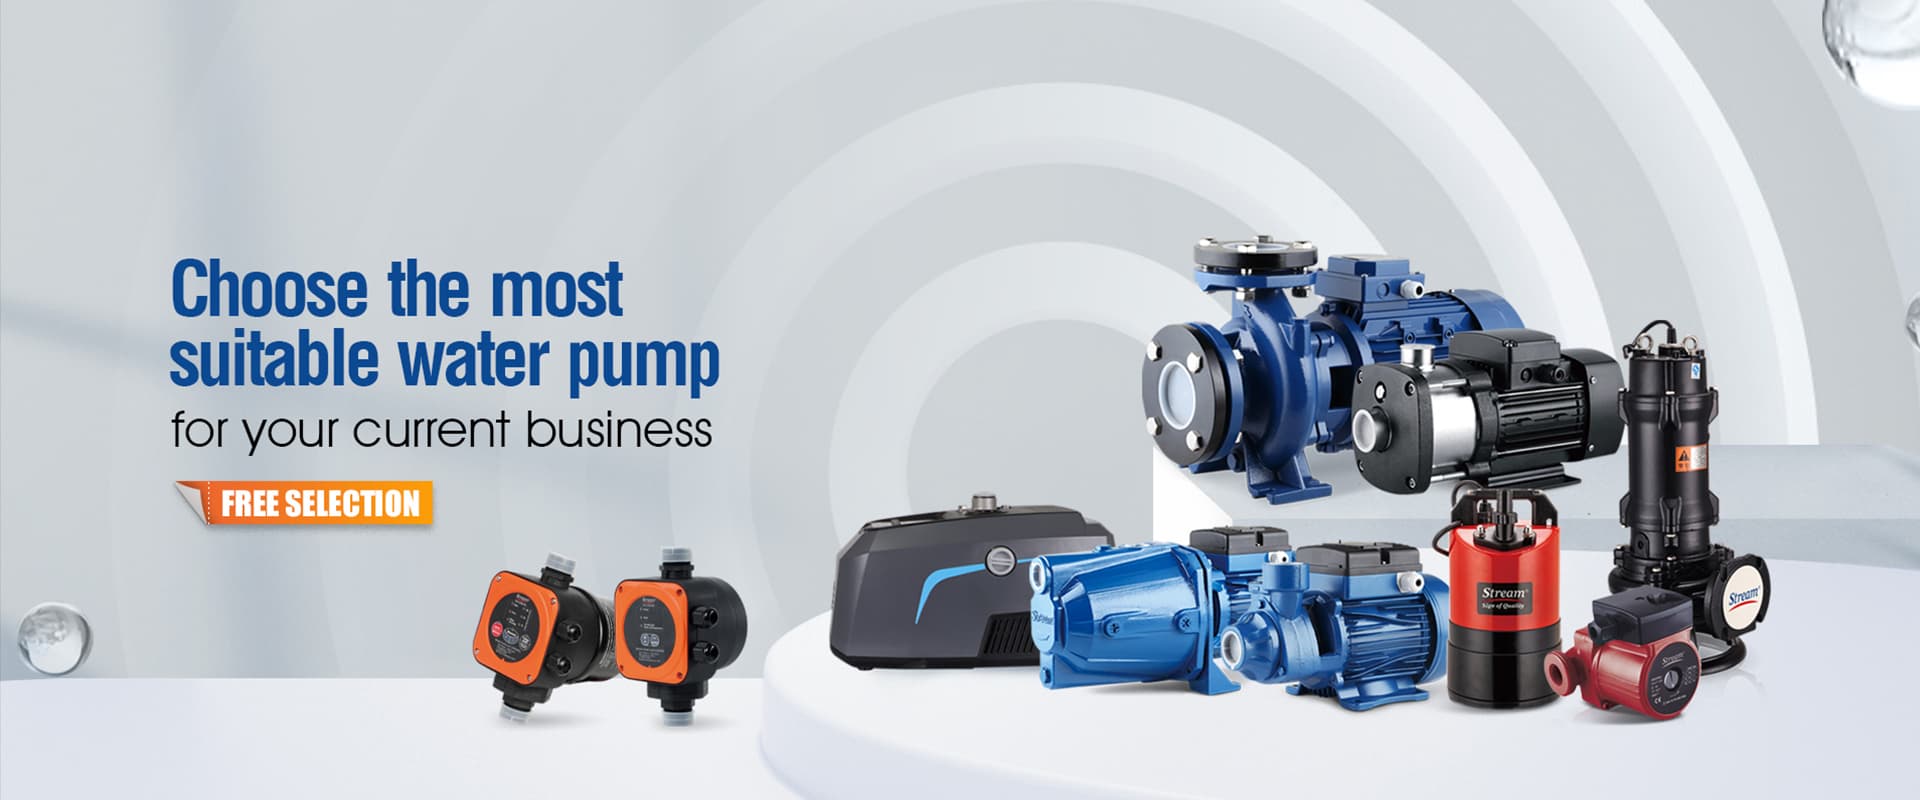 Choose the most suitable water pump for your current business